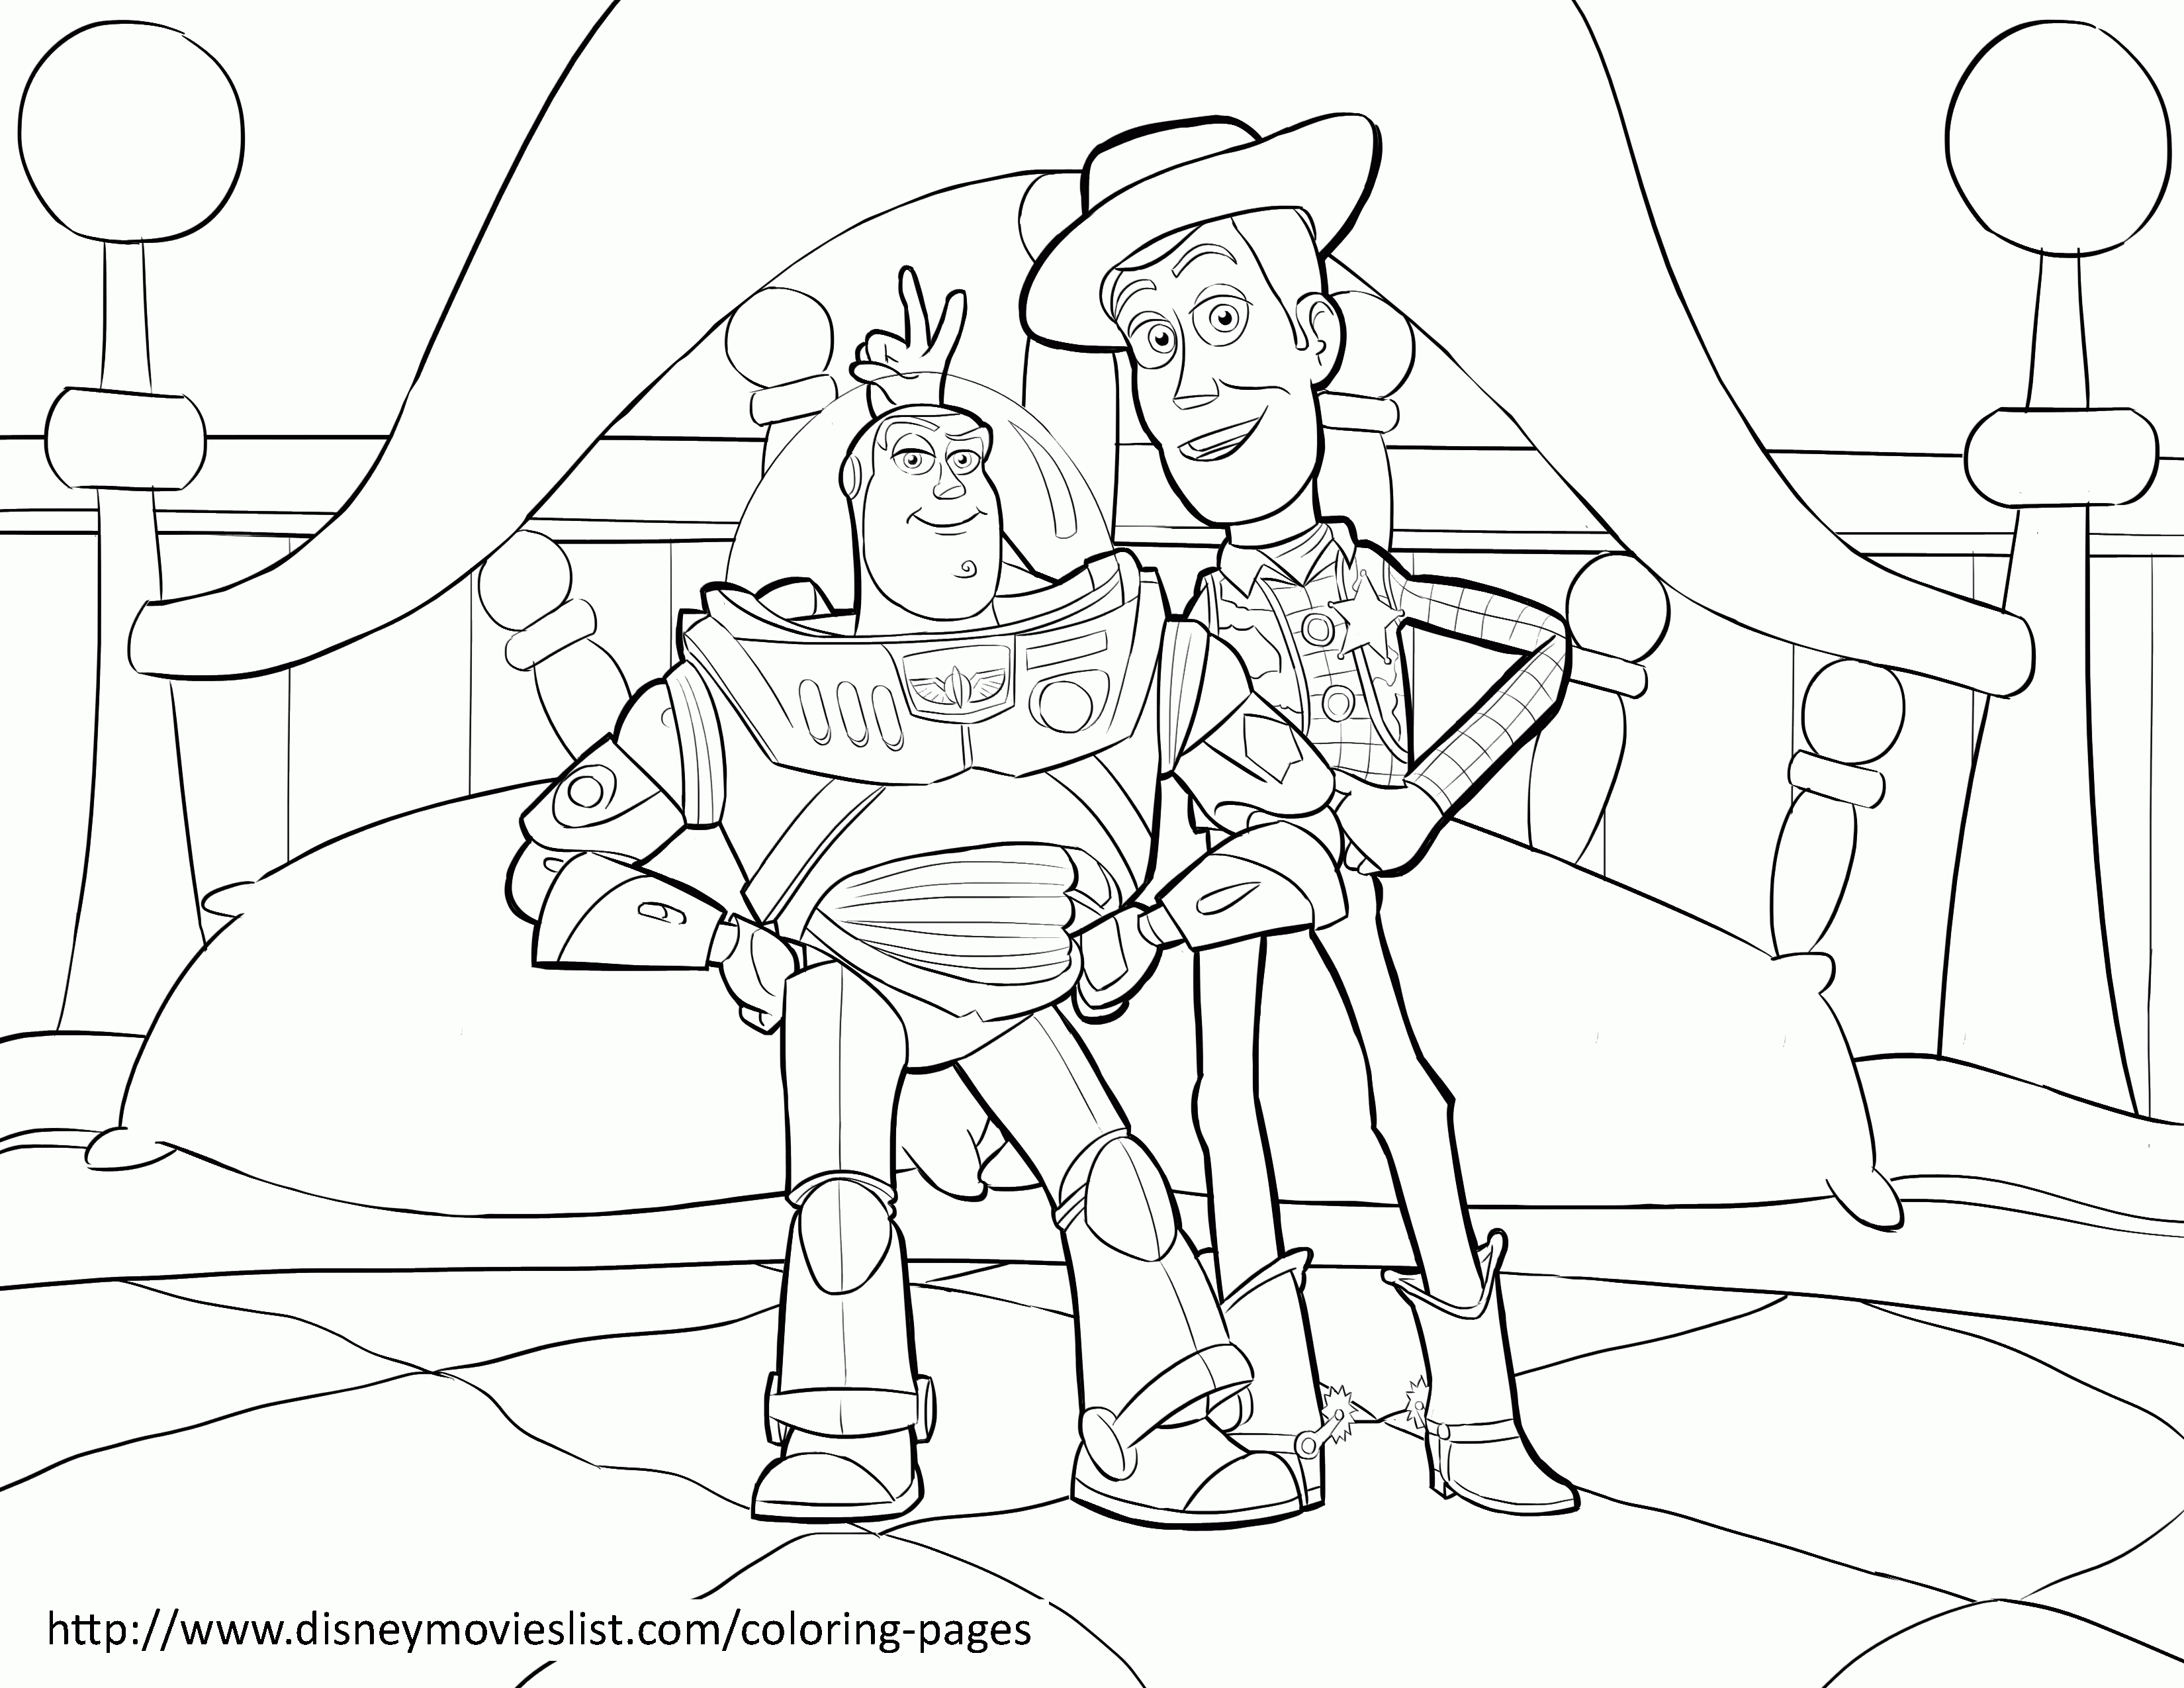 Free Printable Disney Toy Story Coloring Pages - Coloring Home